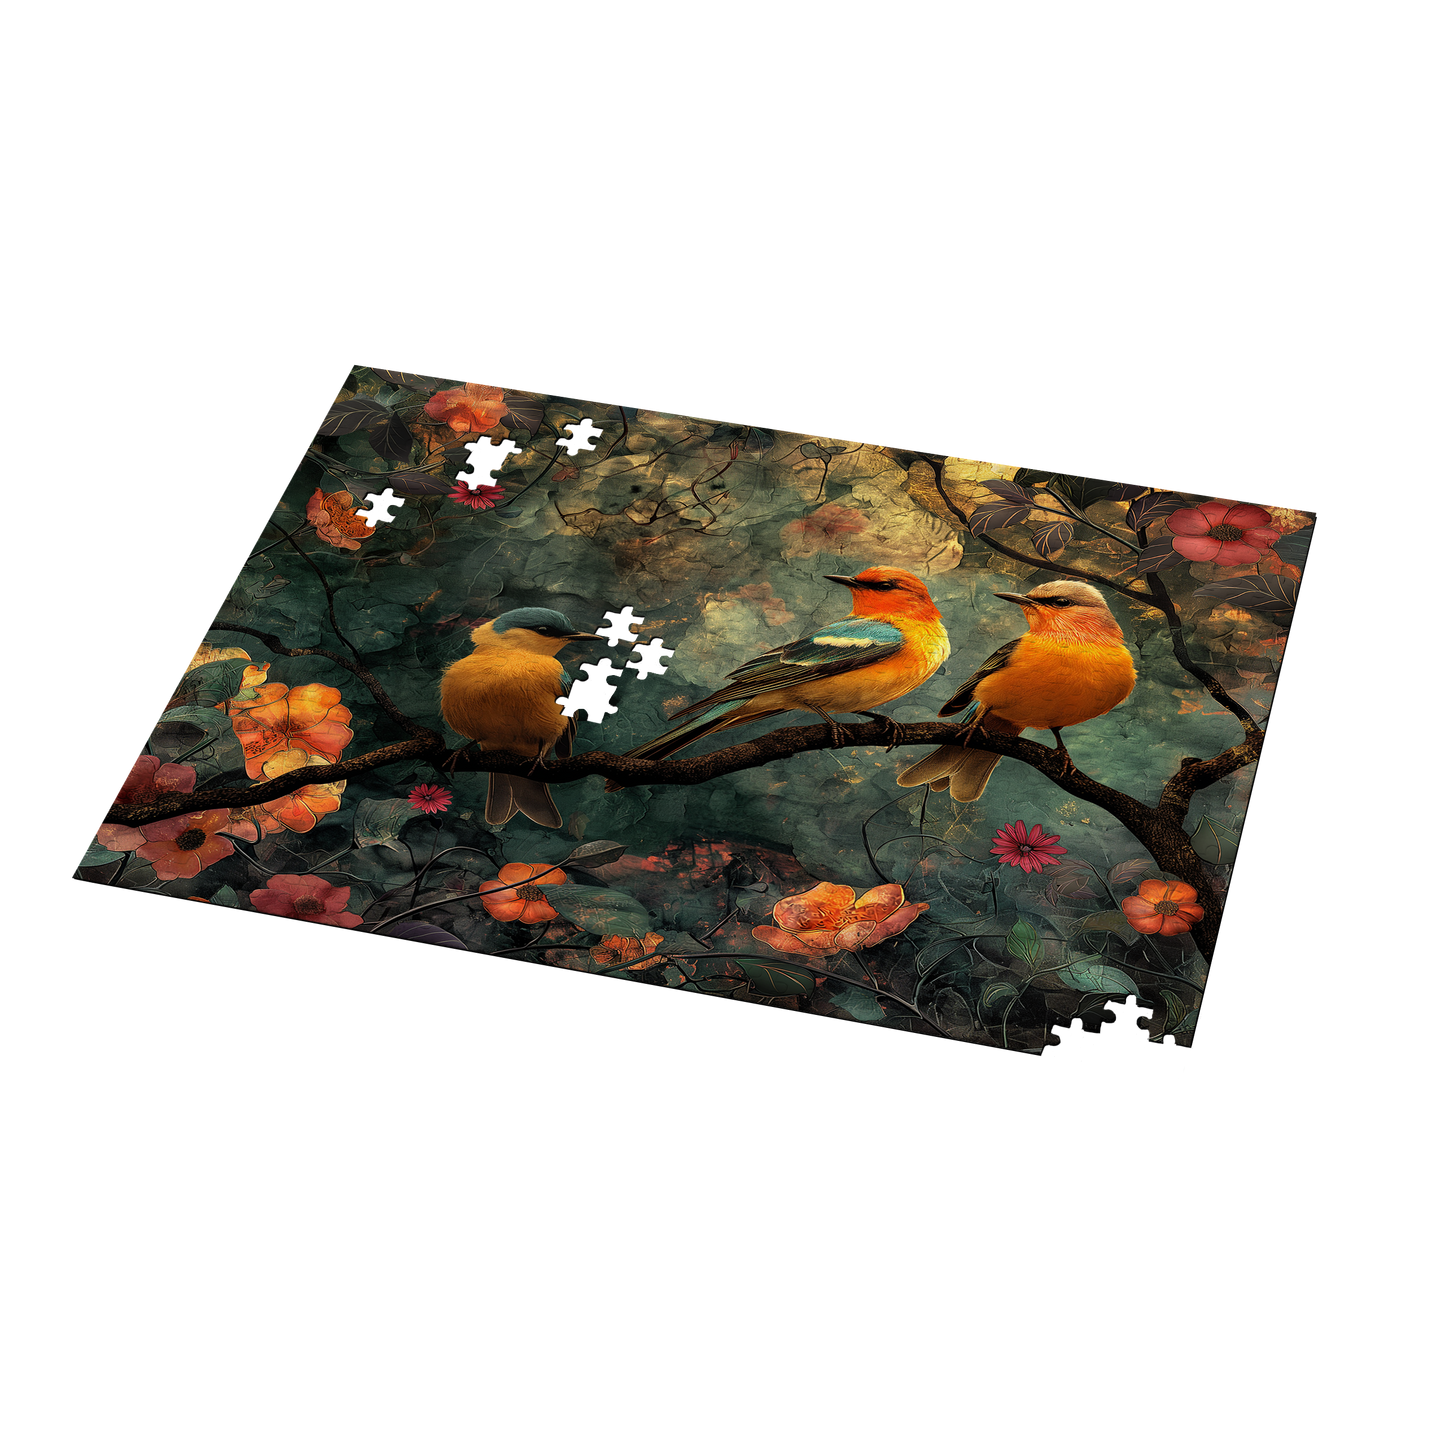 Blossom and Birdsong - Premium Jigsaw Puzzle - Avian, Beautiful, Gentle - Multiple Sizes Available